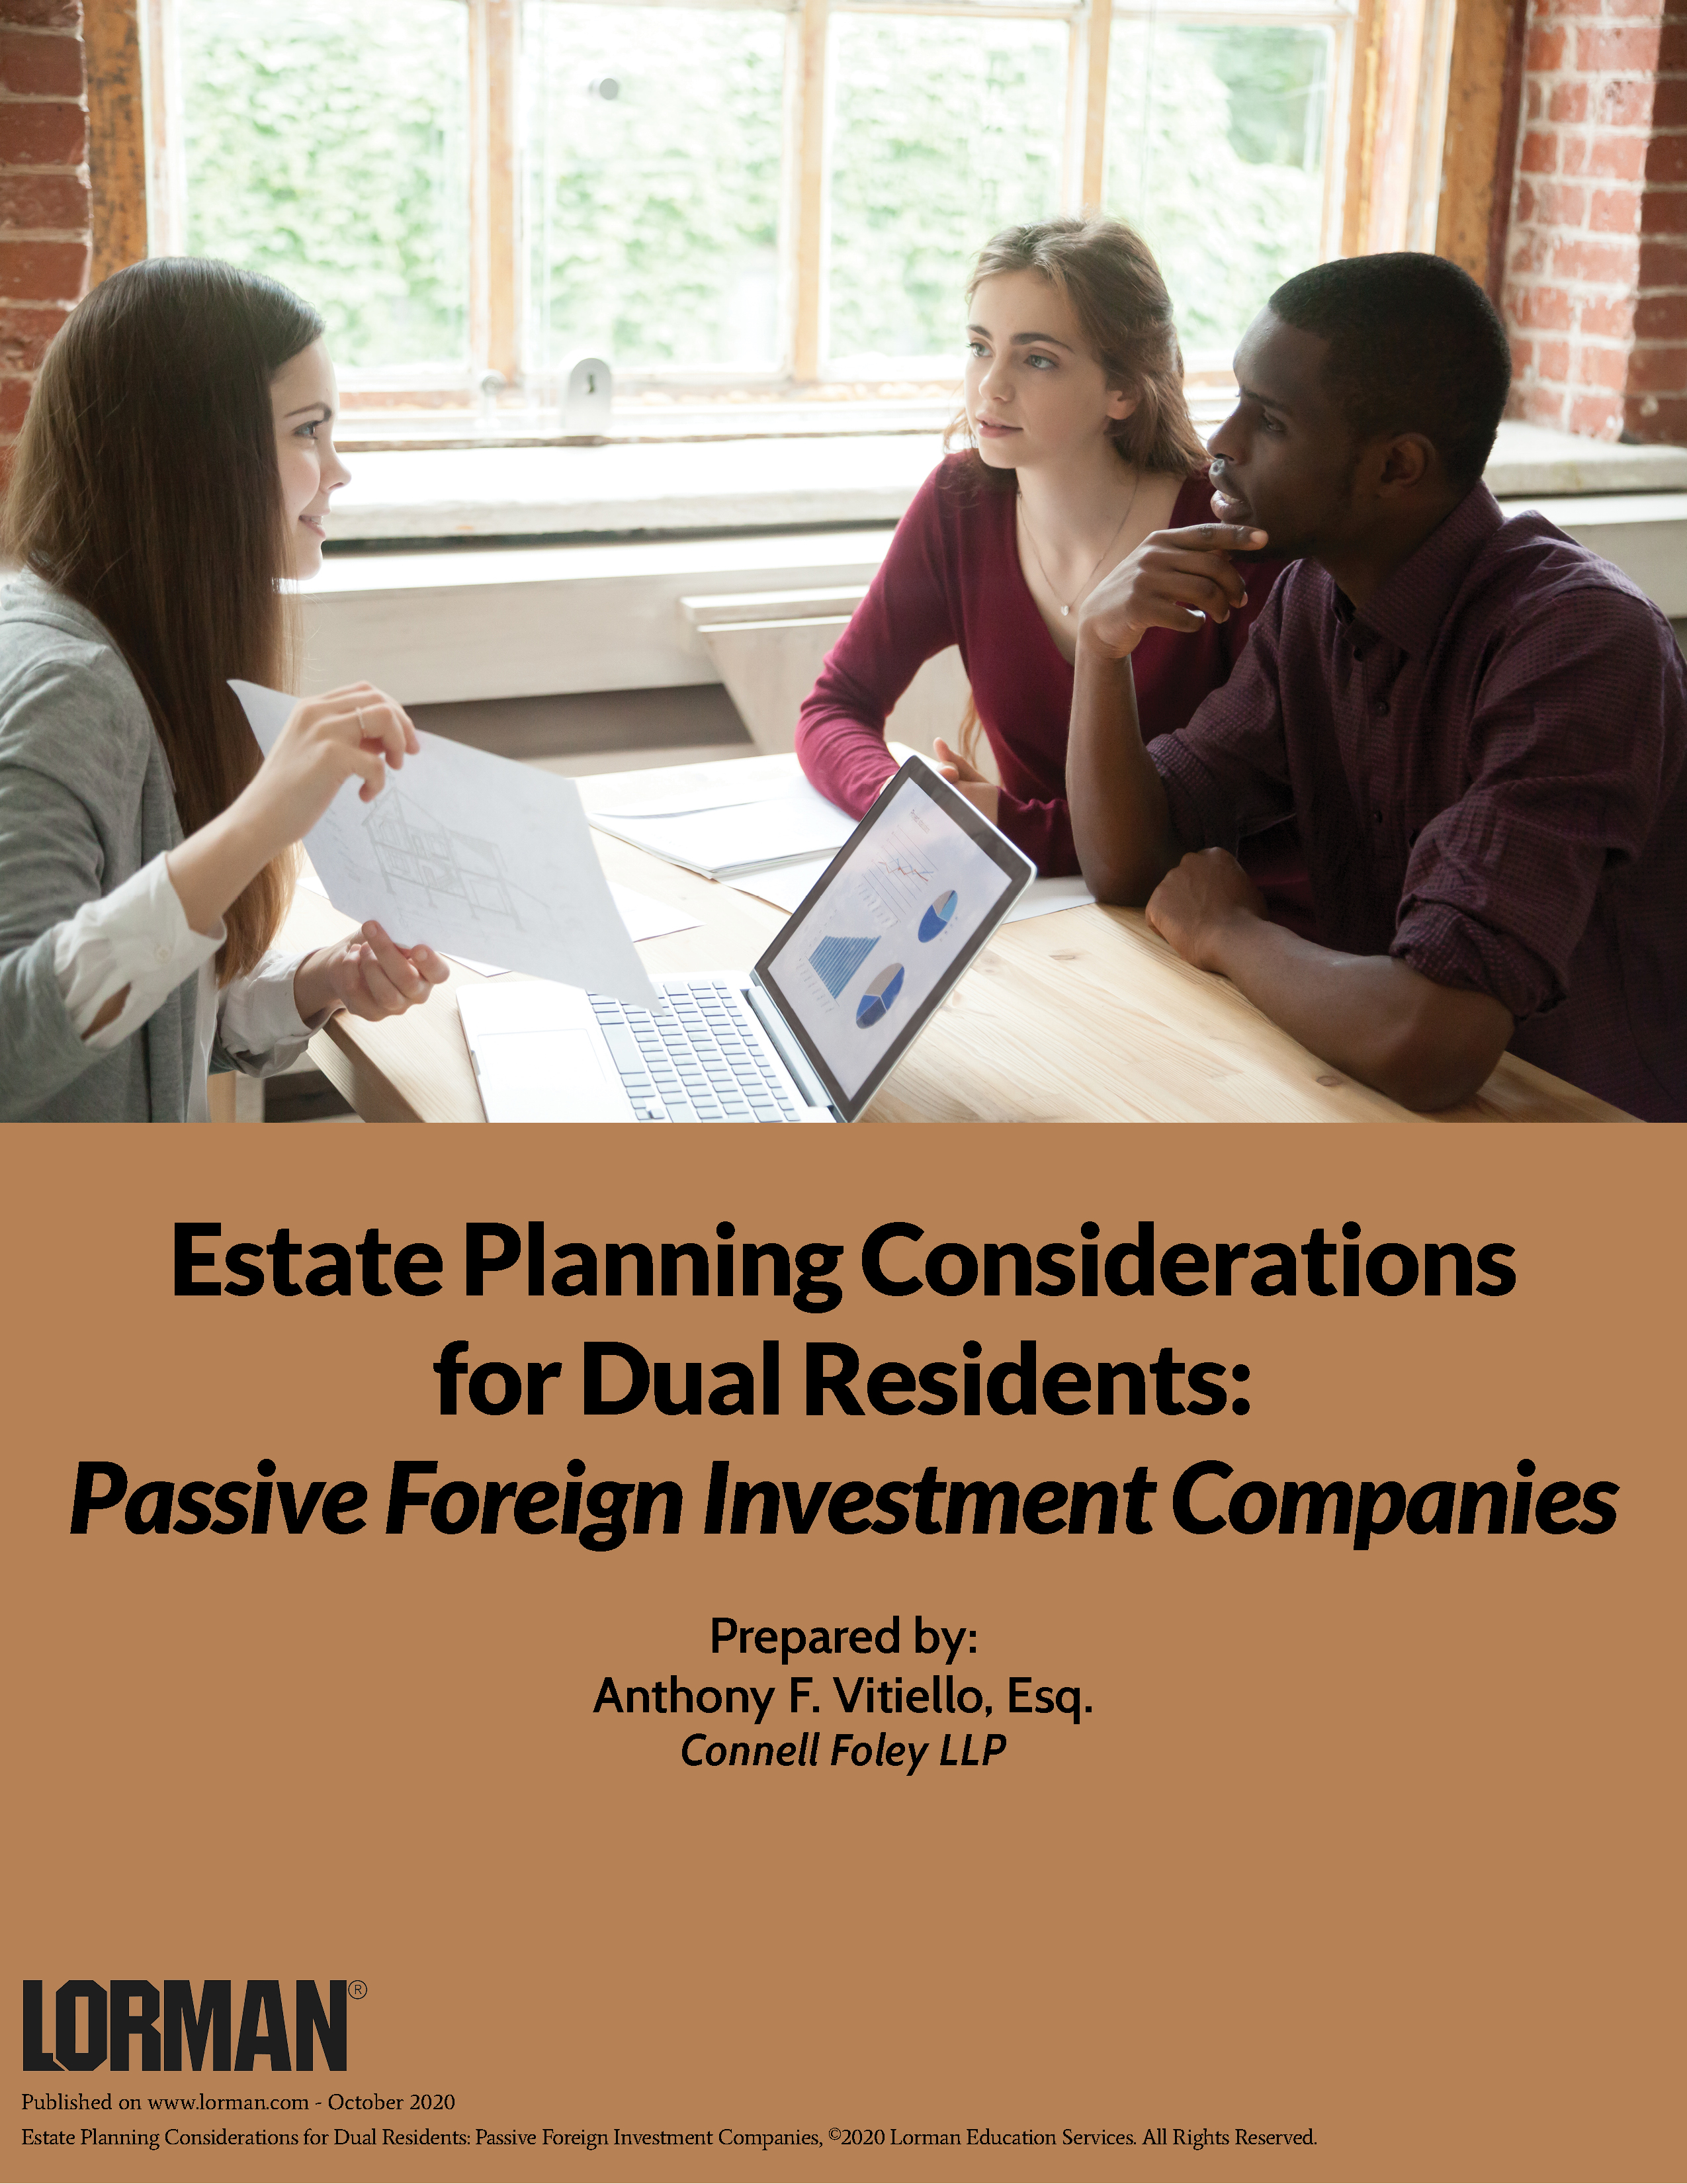 Estate Planning Considerations for Dual Residents: Passive Foreign Investment Companies